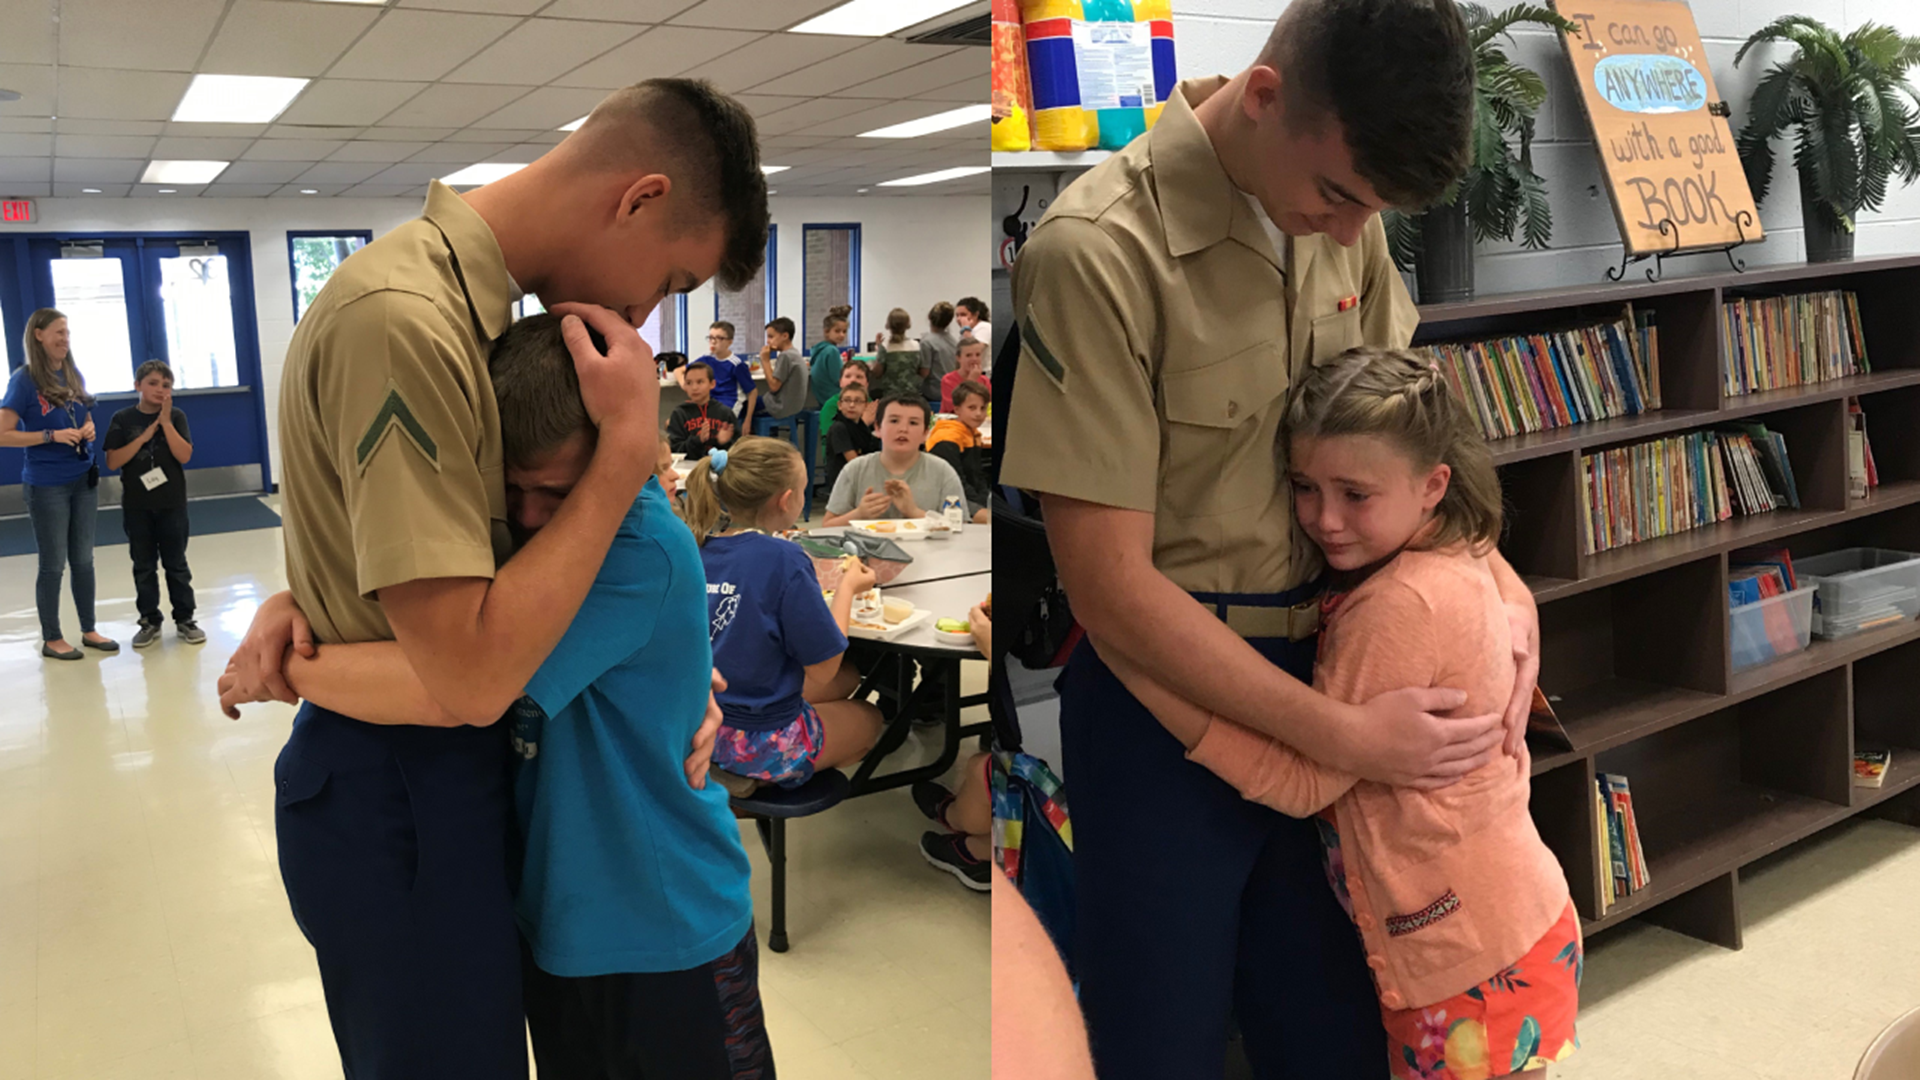 PFC Ethan Johnson surprised his siblings Tuesday while they were at school, shedding quite a few tears.